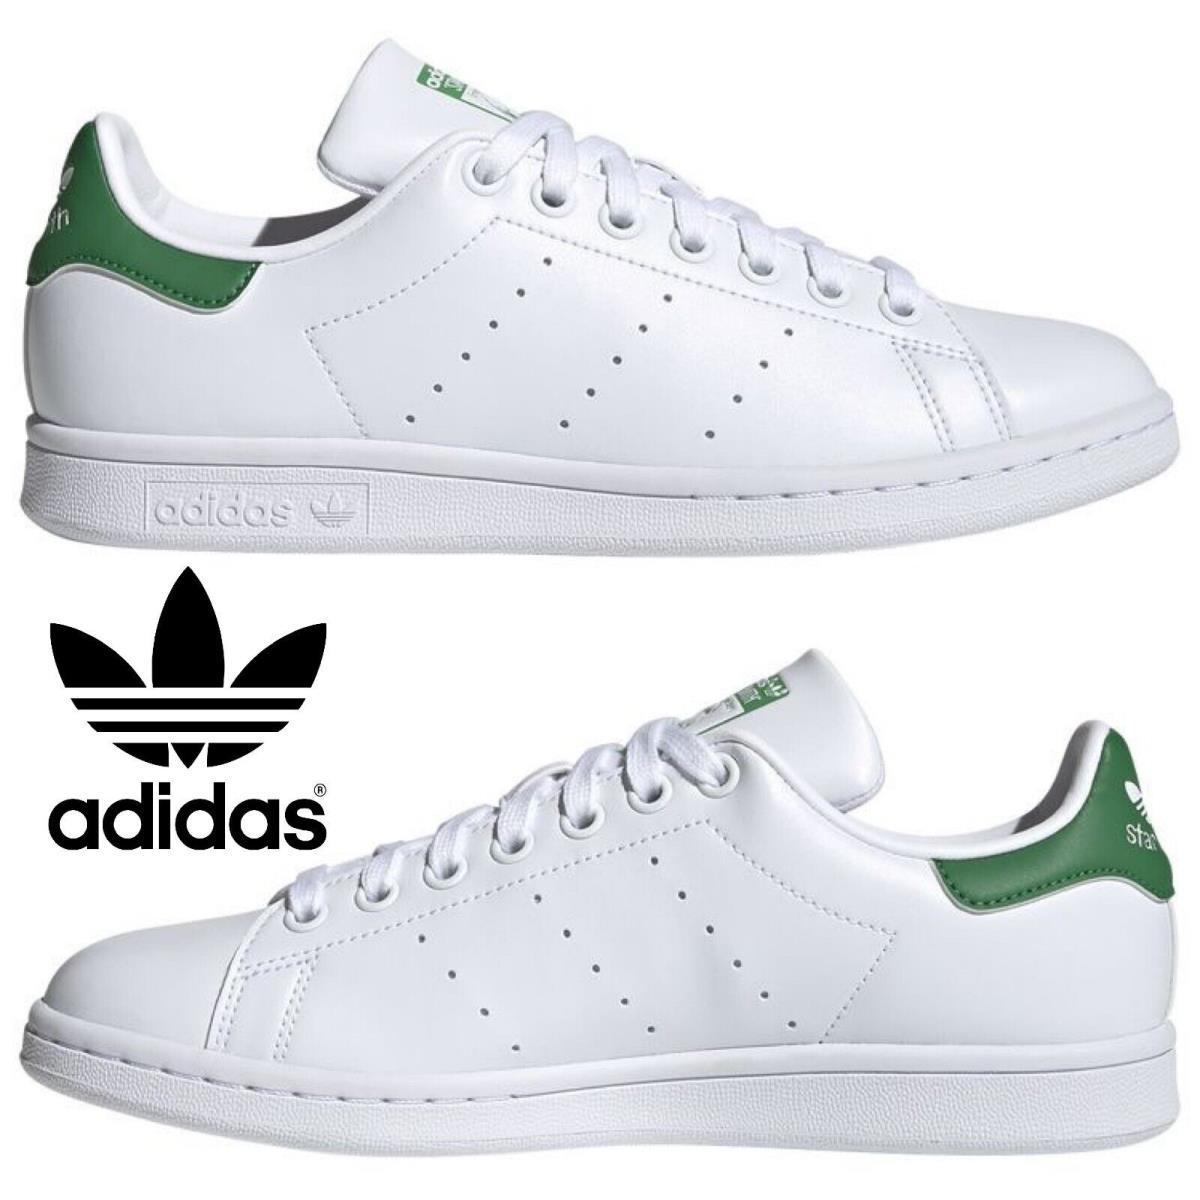 Adidas Originals Stan Smith Women s Sneakers Casual Shoes Sport Gym White Green